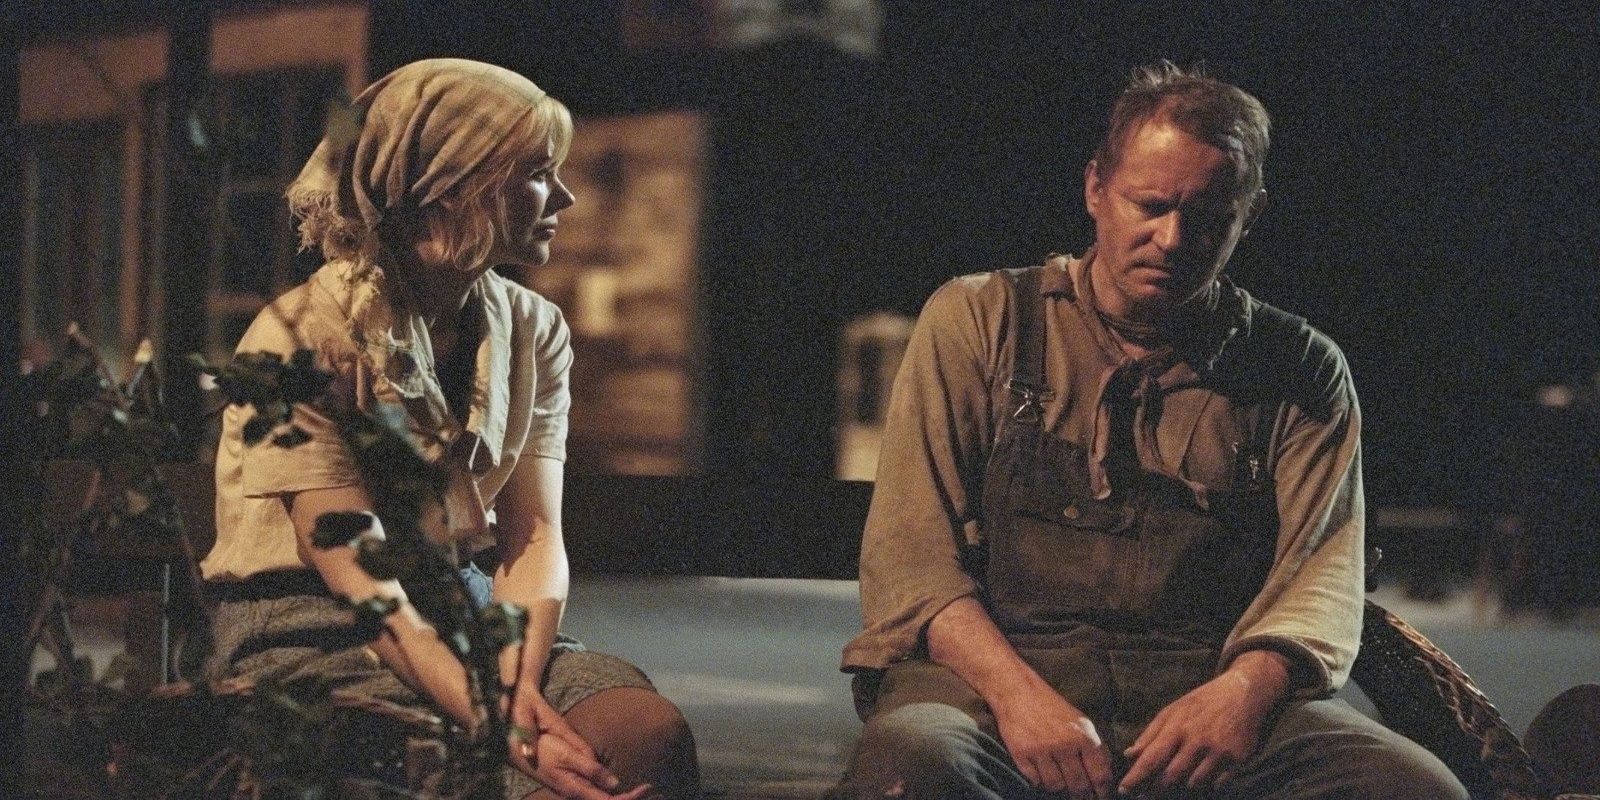 Grace and Chuck speak on the street in Dogville